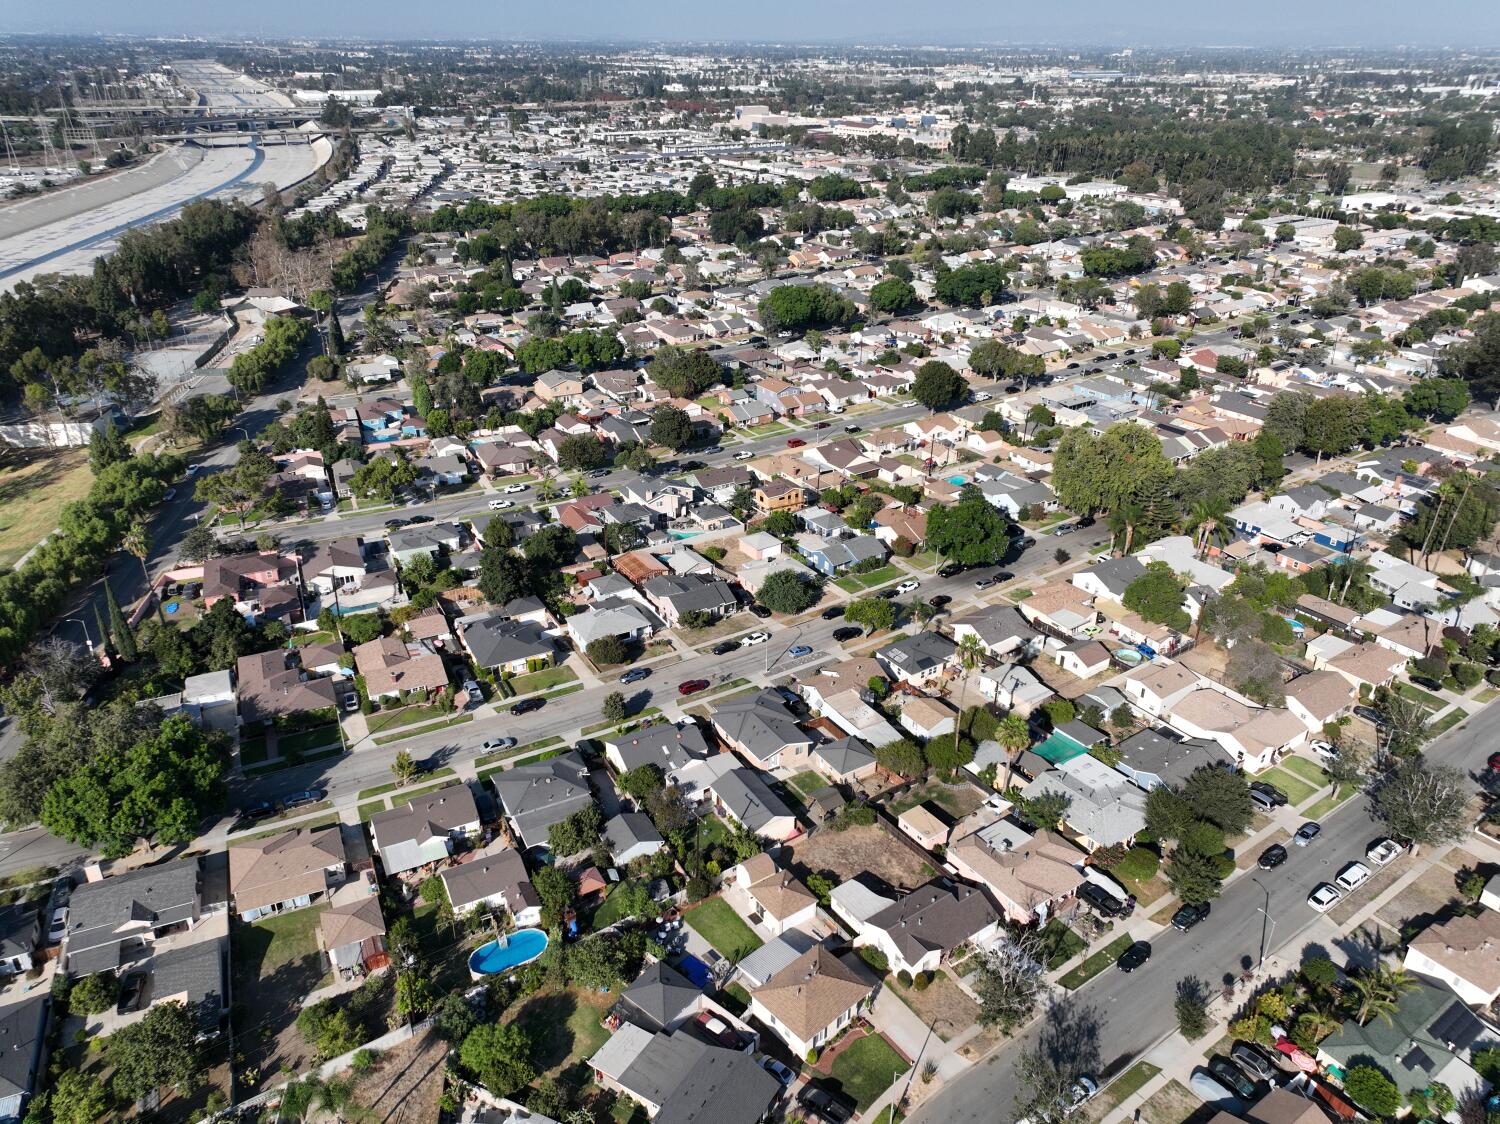 Opinion: How L.A. can build more housing without looking like New York